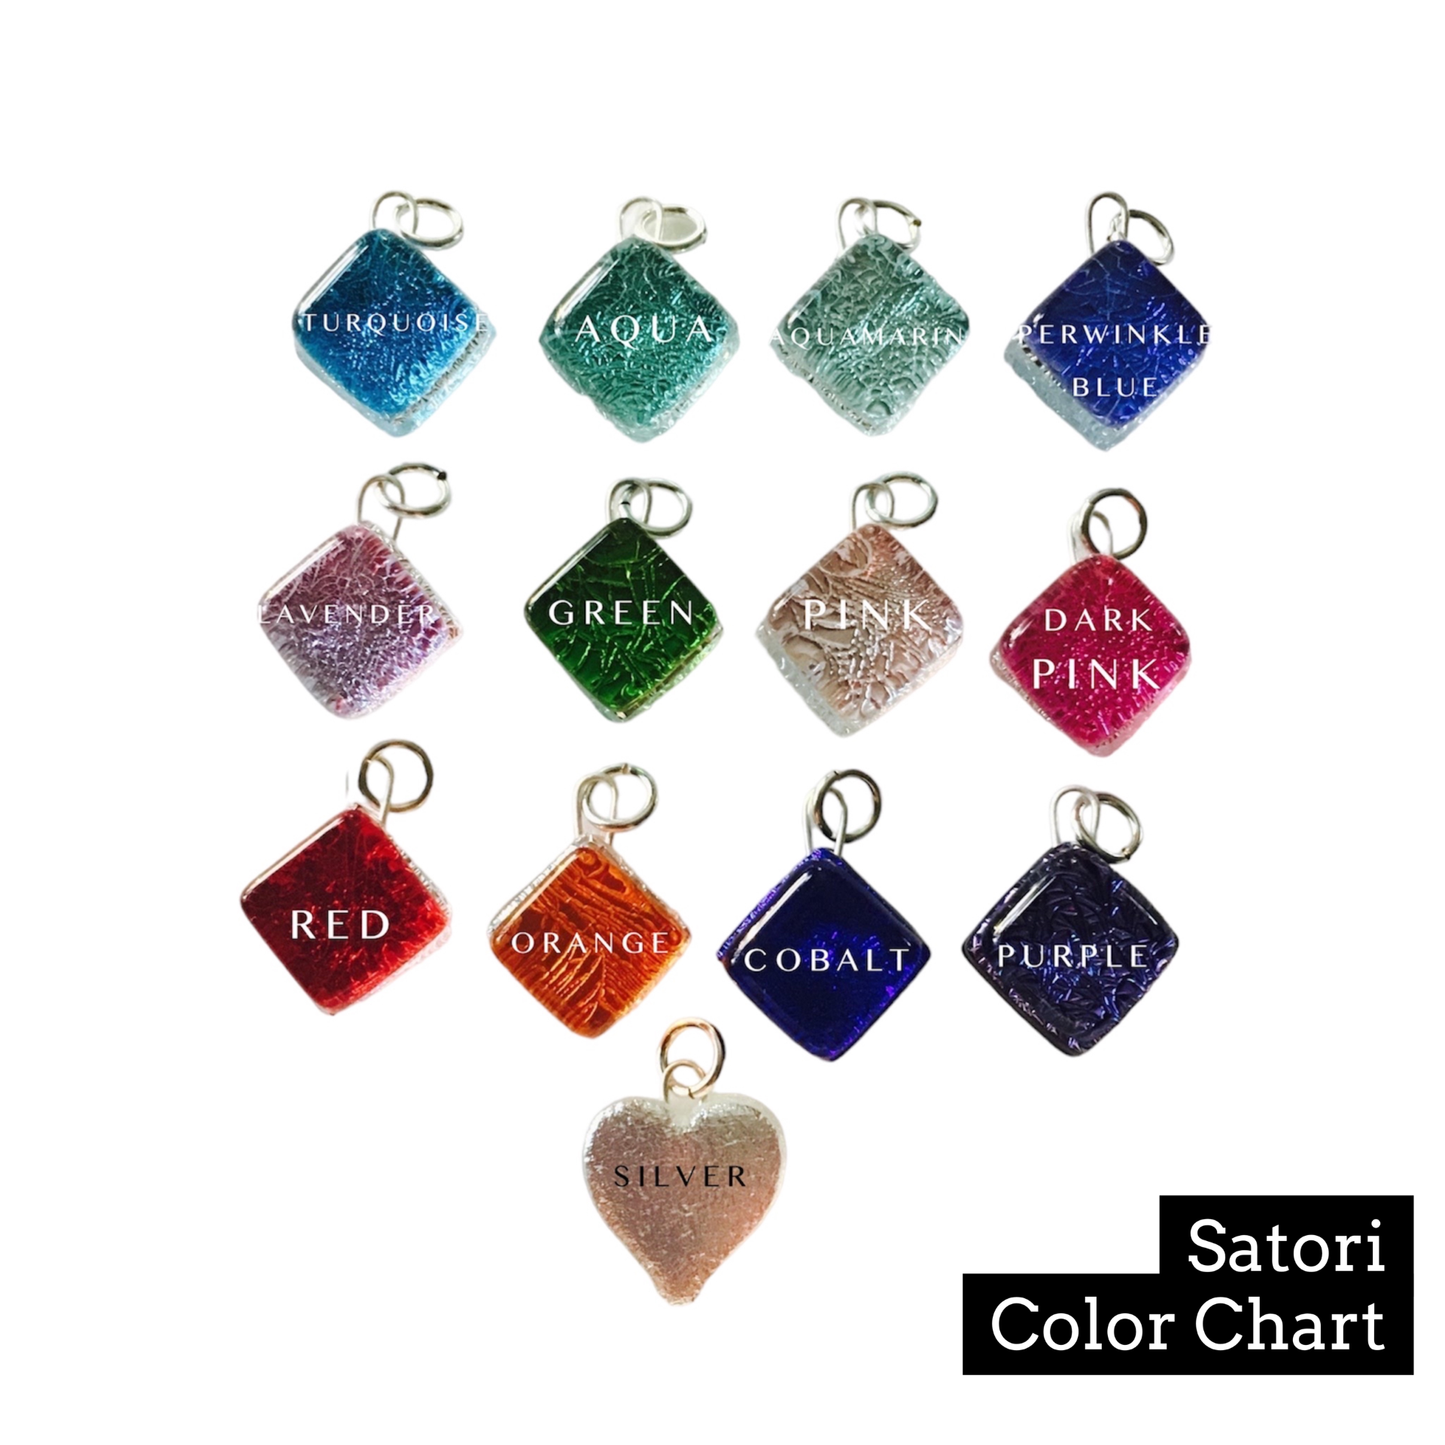 Good Chi™ Charm Necklace for Positive Energy